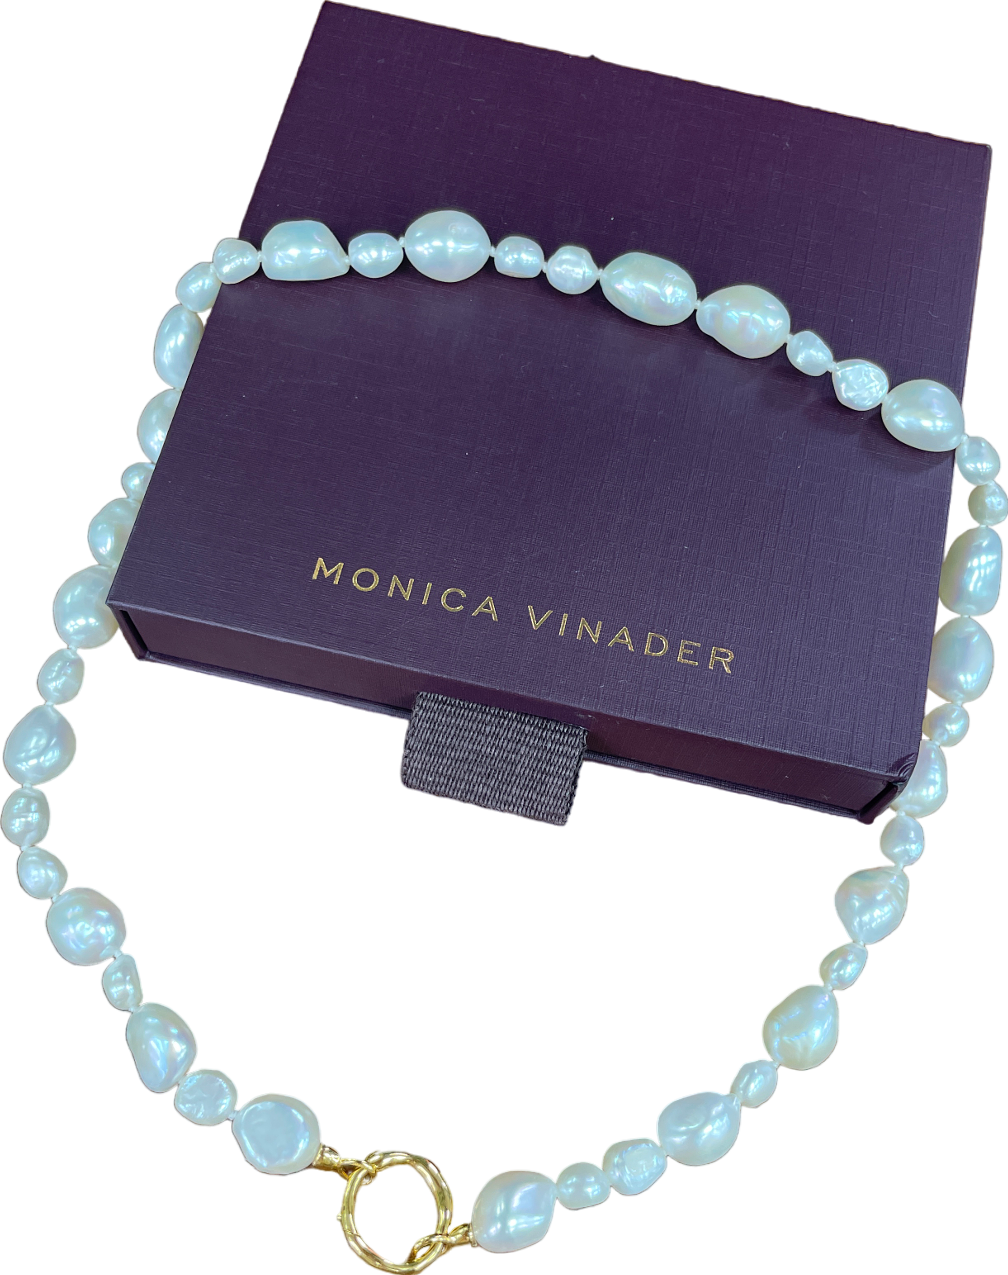 Monica Vinader Cream Irregular Pearl Mixed Necklace 46cm/18' 18k Gold Vermeil & Pearl One Size